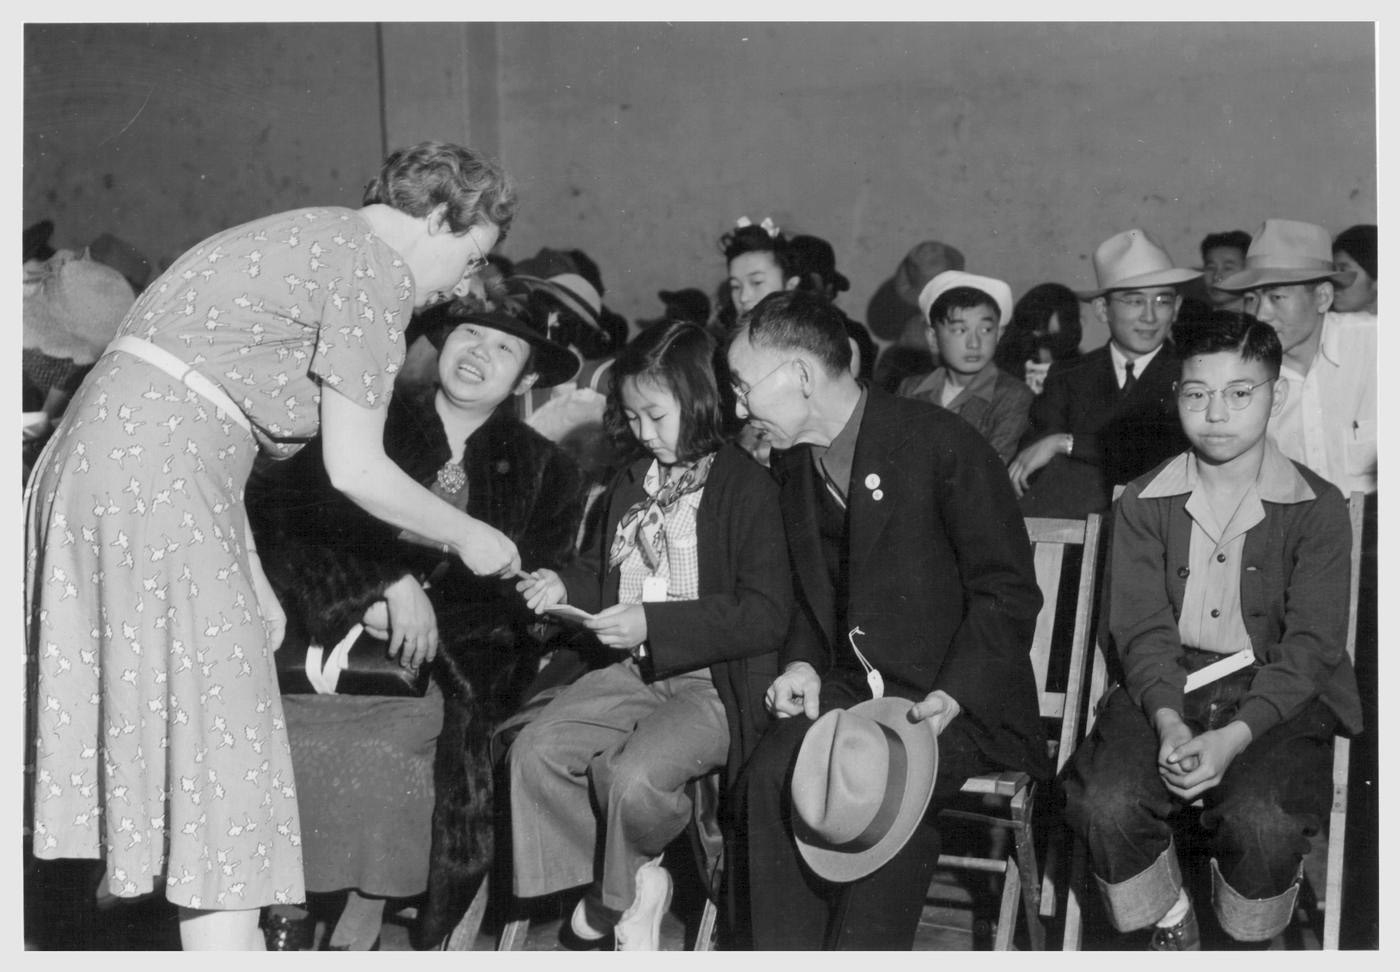 Paul Kitagaki Jr.Õs family waits to depart from 1117 Oak Street, the W.C.C.A. (Wartime Civil Control Authority) Control Station, in Oakland in 1942 for the Tanforan Assembly Center. KitagakiÕs grandmother, Juki Kitagaki, 53, is seated at left. Kimiko, his aunt, then 11, receives a pamphlet from a family friend, Dorothy Hightower, expressing her churchÕs good wishes. Grandfather Suyematsu Kitagaki, 65, watches. The photographerÕs father, Kiyoshi, 14, is at right. Family number 20247 Photographer: Lange, Dorothea -- Oakland, California. 5/ 6/ 42 Original Caption: Oakland, Calif.--Mr. and Mrs. Kitagaki with two of their children at the WCCA Control Station a few minutes before departure by bus for Tanforan Assembly Center. A local church member is handing Kimiko Kitagaki a pamphlet expressing the good wishes of the church toward the departing evacuees. Mr. Kitagaki, prior to evacuation, was in the cleaning and dyeing business. -- Photographer: Lange, Dorothea -- Oakland, California. 5/6/42 Identifier: Volume 62 Identifier: Section G Identifier: WRA no. C-581 Collection: War Relocation Authority Photographs of Japanese-American Evacuation and Resettlement Series 14: Preevacuation